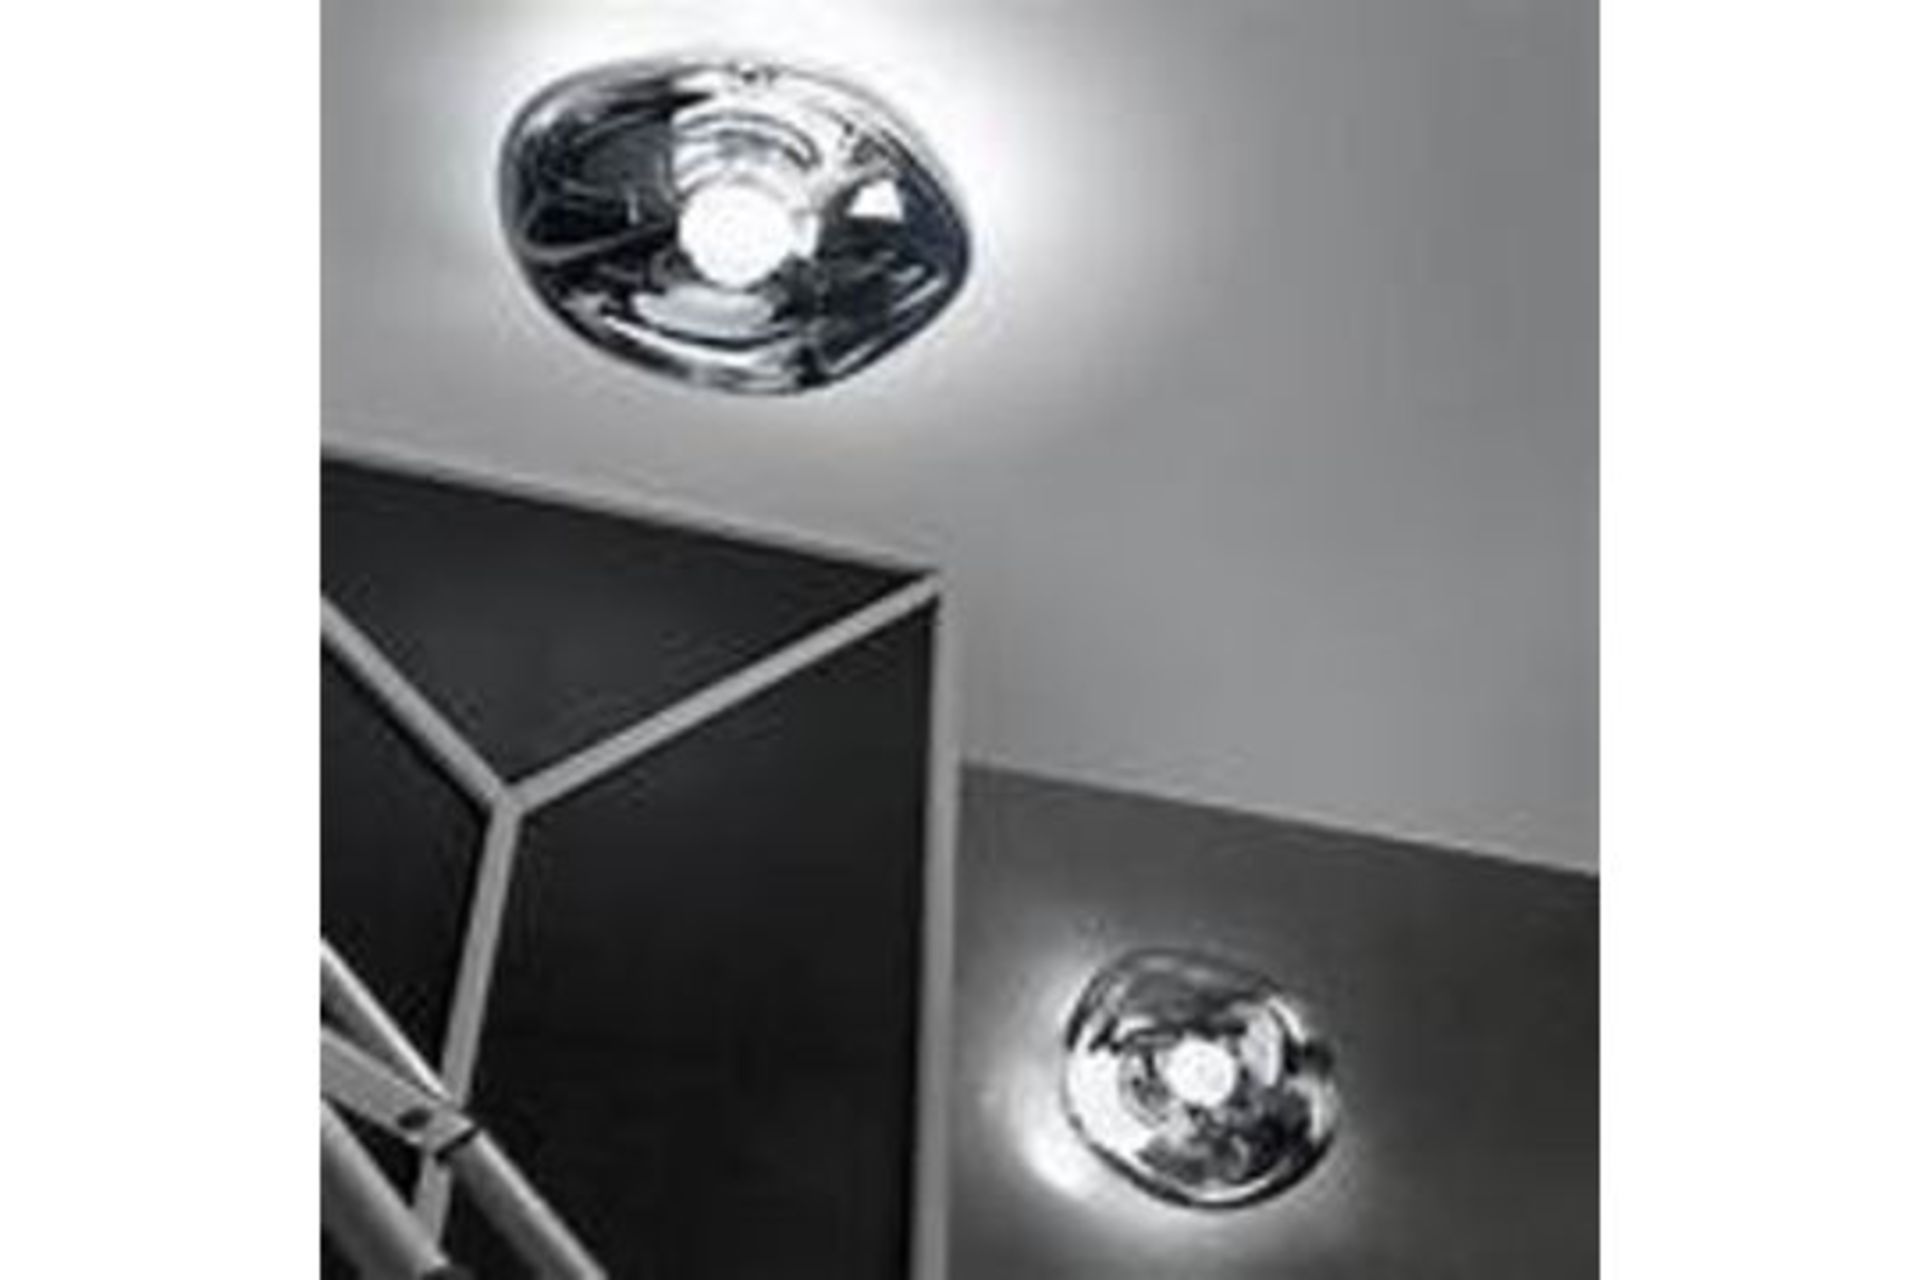 Lava Silver Wall Light The Body Of The Lava Wall Light Has An Organic Feel Like The Melting Ice Of A - Image 2 of 2